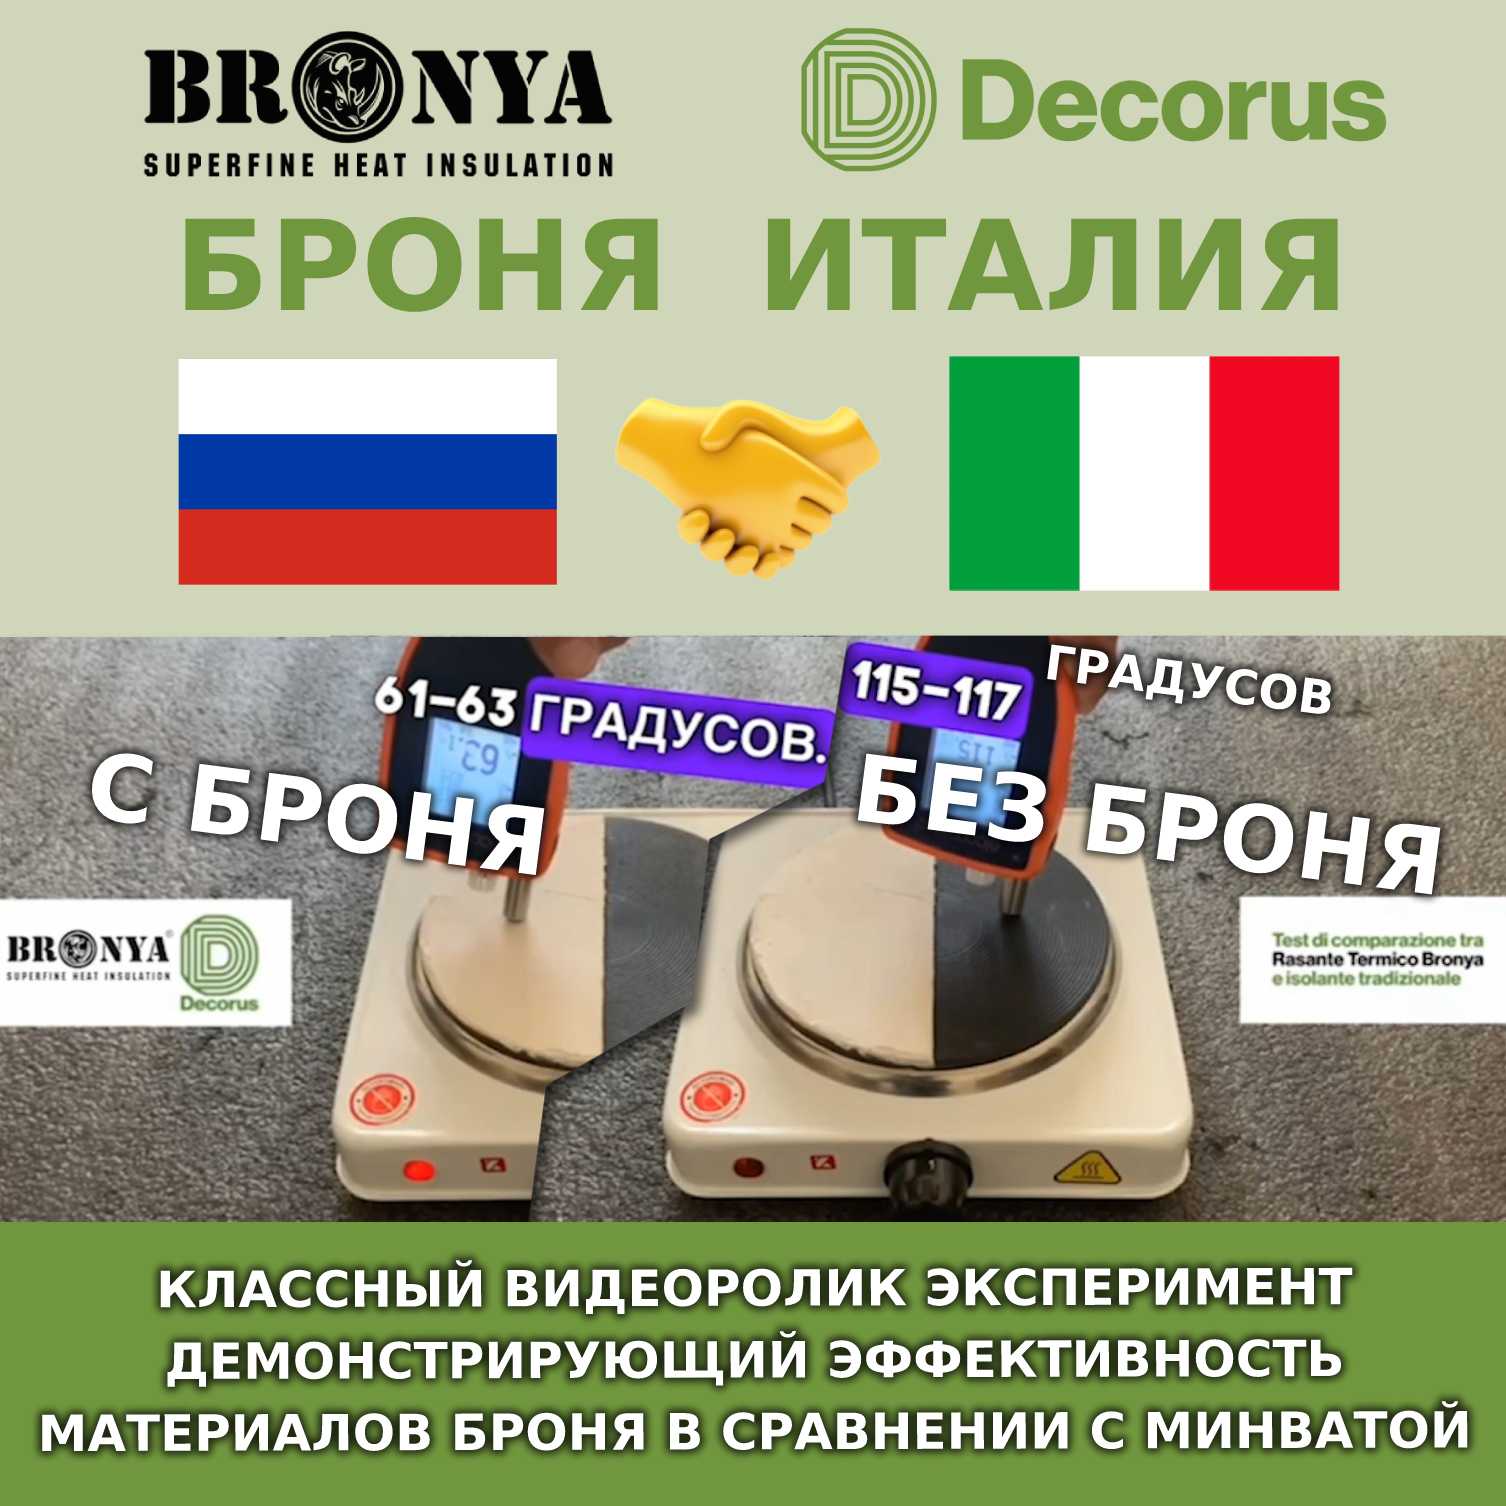 A cool video experiment demonstrating the effectiveness of Bronya materials in comparison with mineral wool from our dealer Armor Italy (video with detailed comments and Russian subtitles)